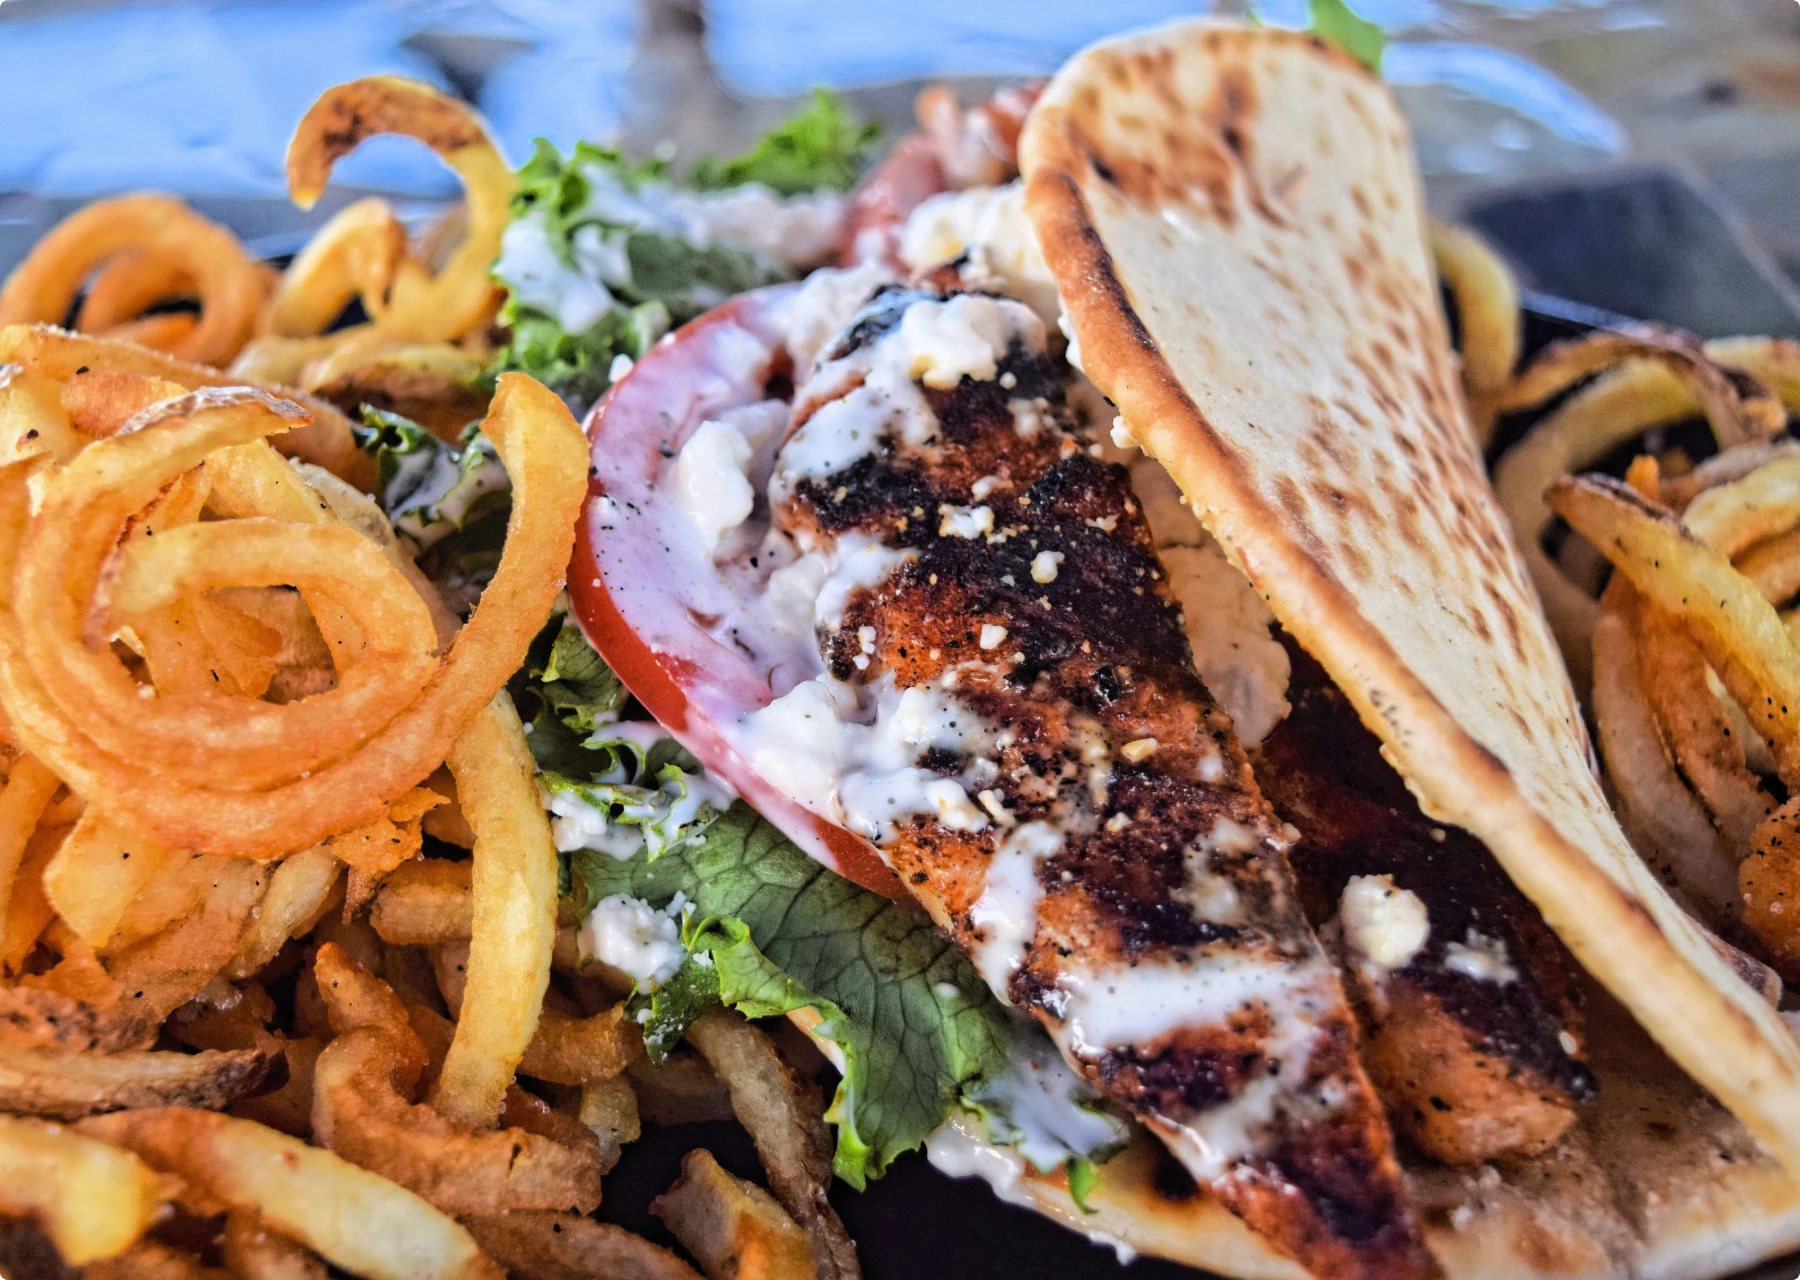 Blackened Chicken Pita with a Side of Curly Fries at SmacNallys Waterfront Bar and Grill - Hero